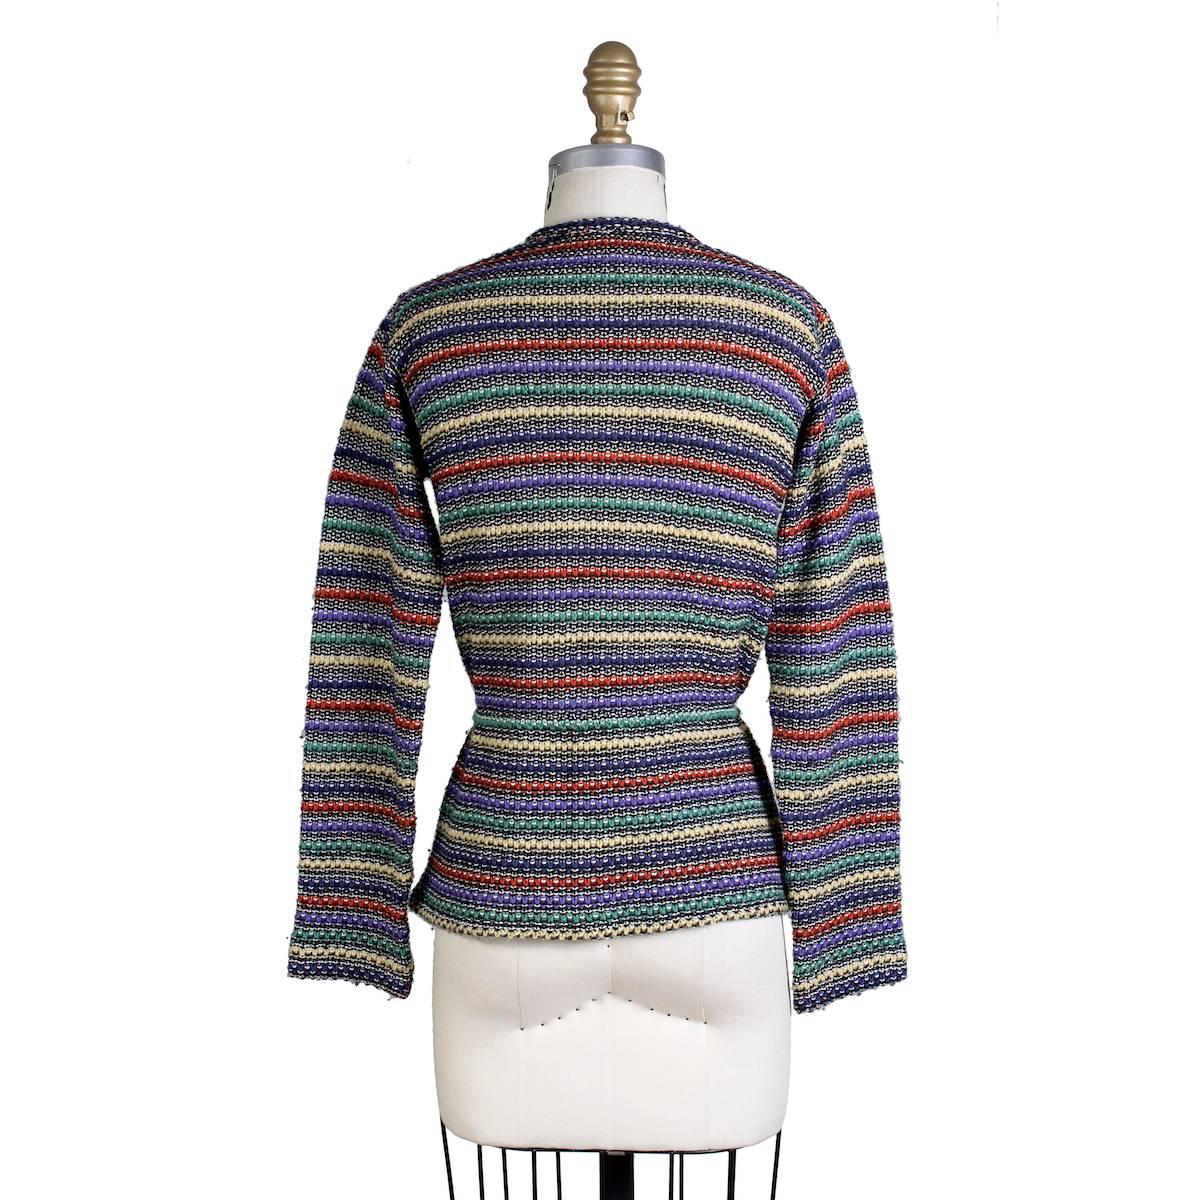 Vintage cardigan sweater from Missoni circa 1970s/1980s.  It features a cinch tie in the waist and button closure down the front.  60% wool 40% cotton.